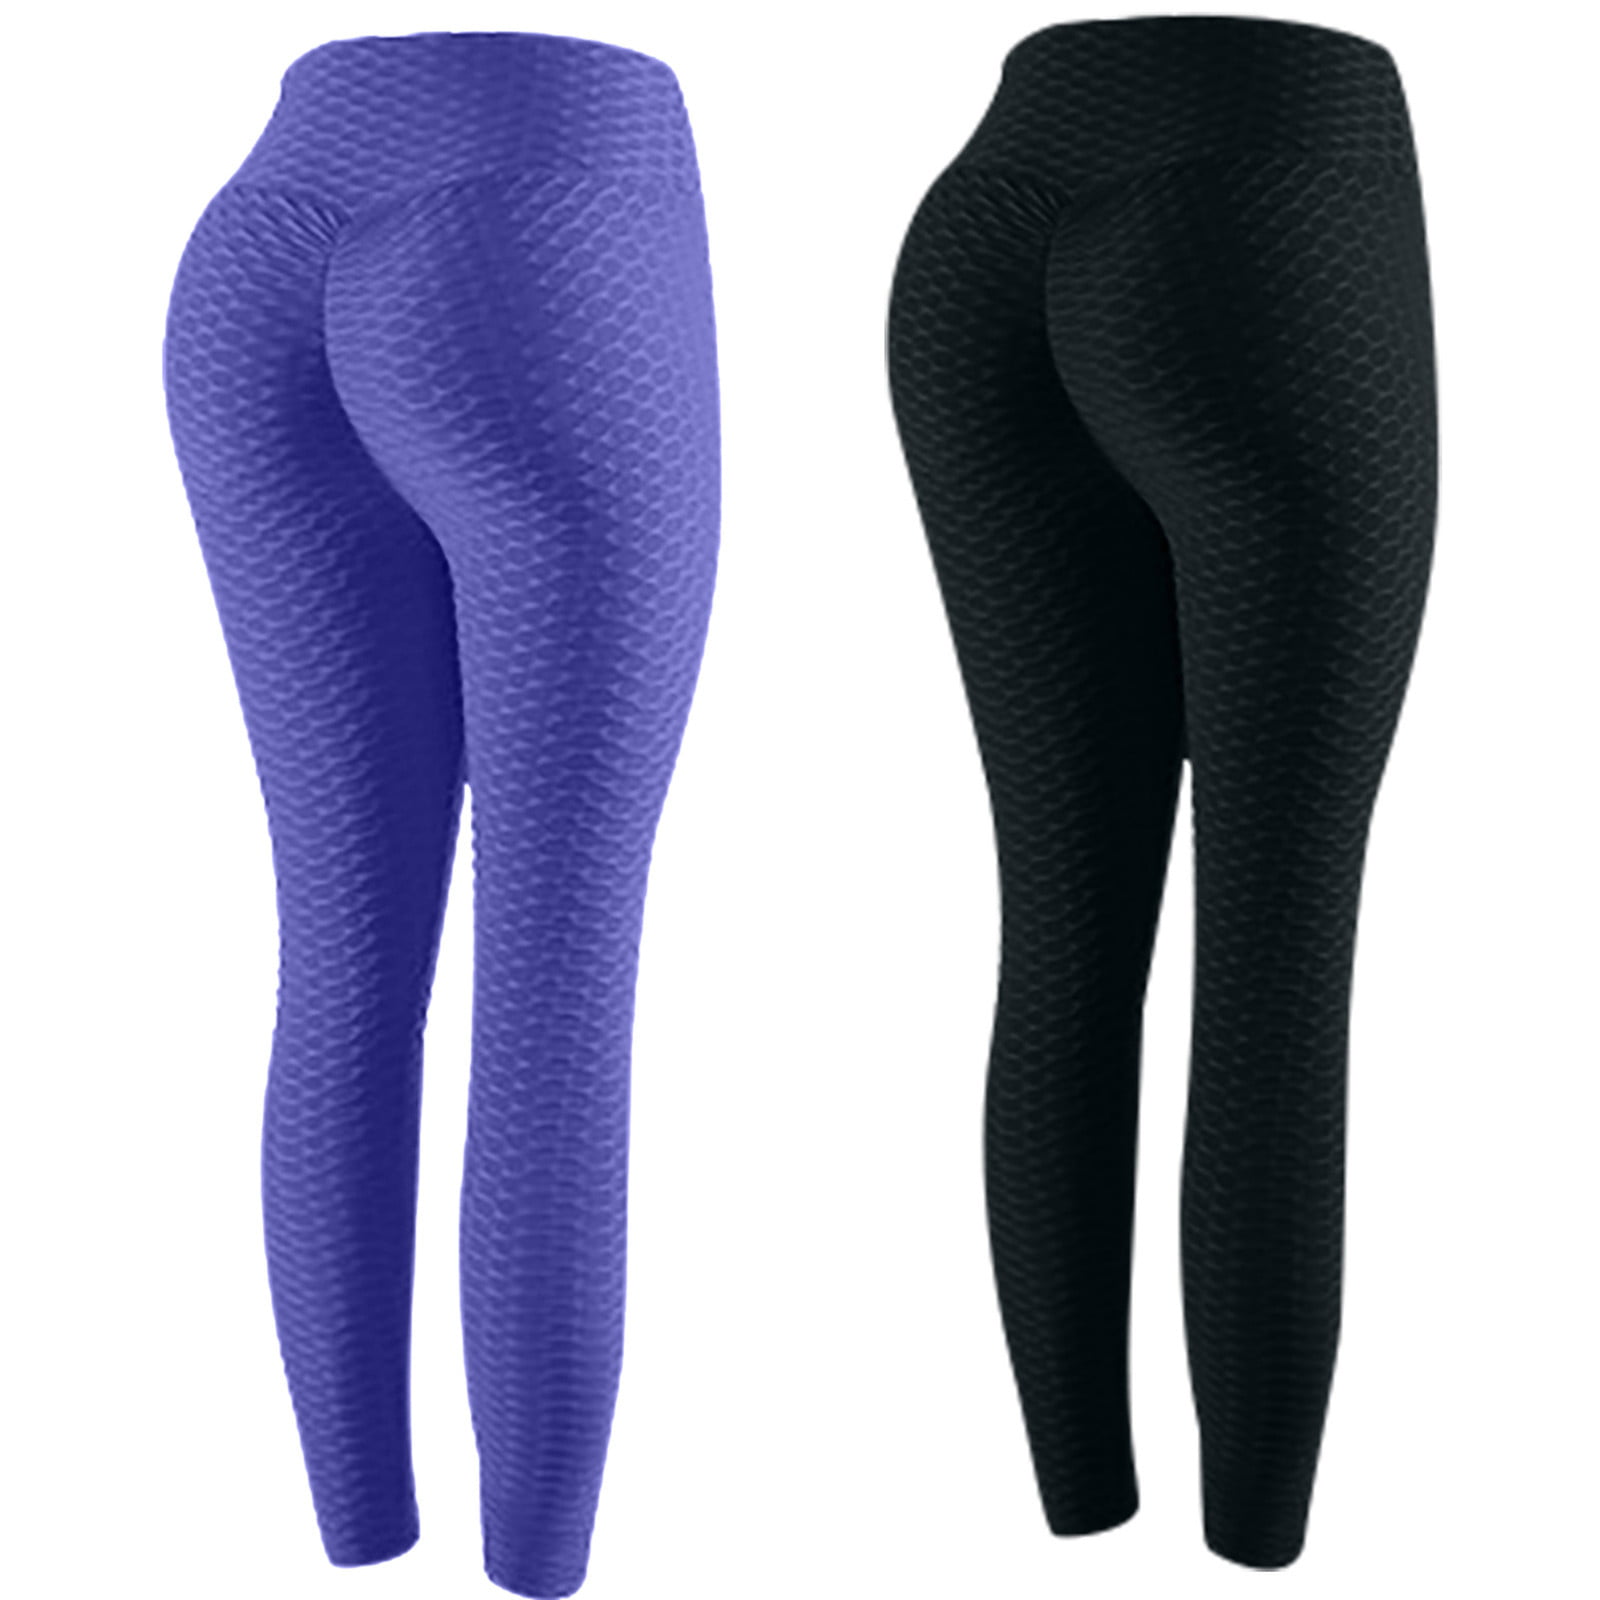 EQWLJWE Yoga Panta for Women High Waist Workout Compression Seamless  Fitness Yoga Leggings Butt Lift Active Tights Stretch Pant